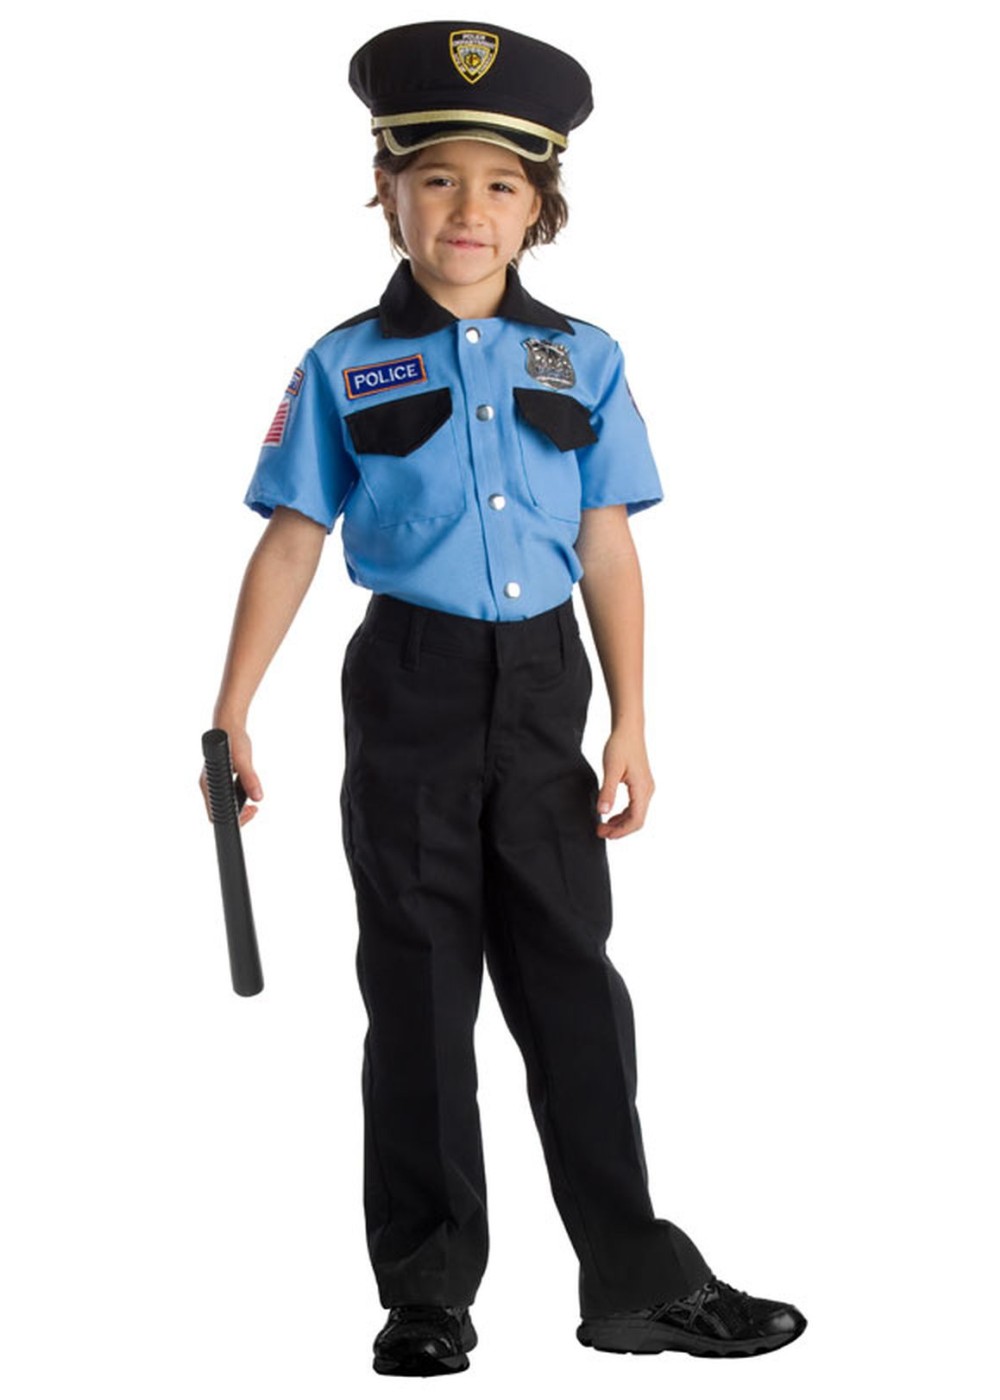 Police Chief Boys Costume - Professional Costumes